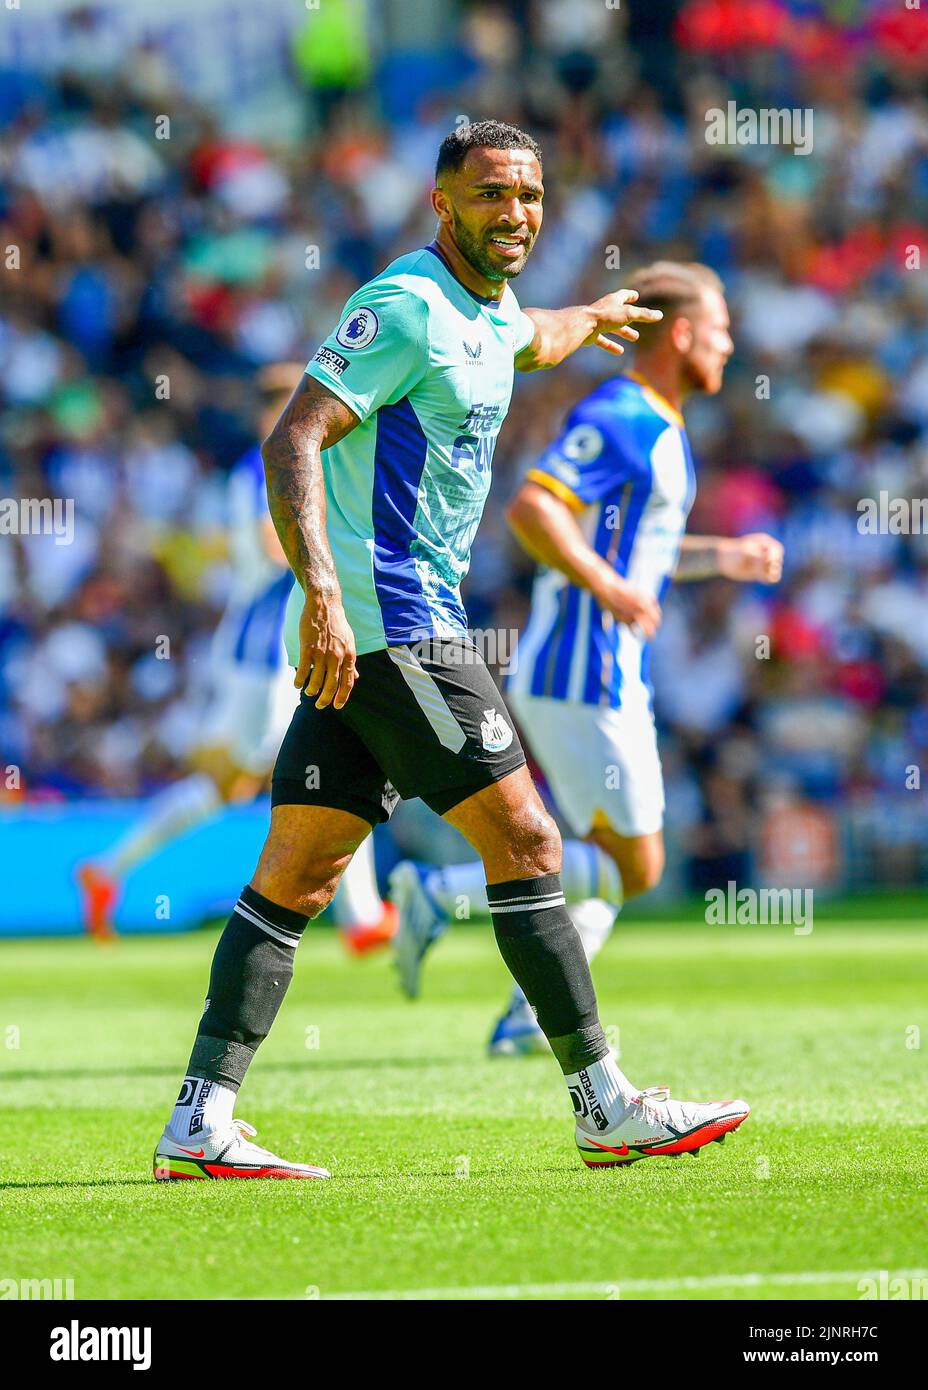 Brighton, UK. 13th Aug, 2022. Callum Wilson of Newcastle United gives directions to his team mates during the Premier League match between Brighton & Hove Albion and Newcastle United at The Amex on August 13th 2022 in Brighton, England. (Photo by Jeff Mood/phcimages.com) Credit: PHC Images/Alamy Live News Stock Photo